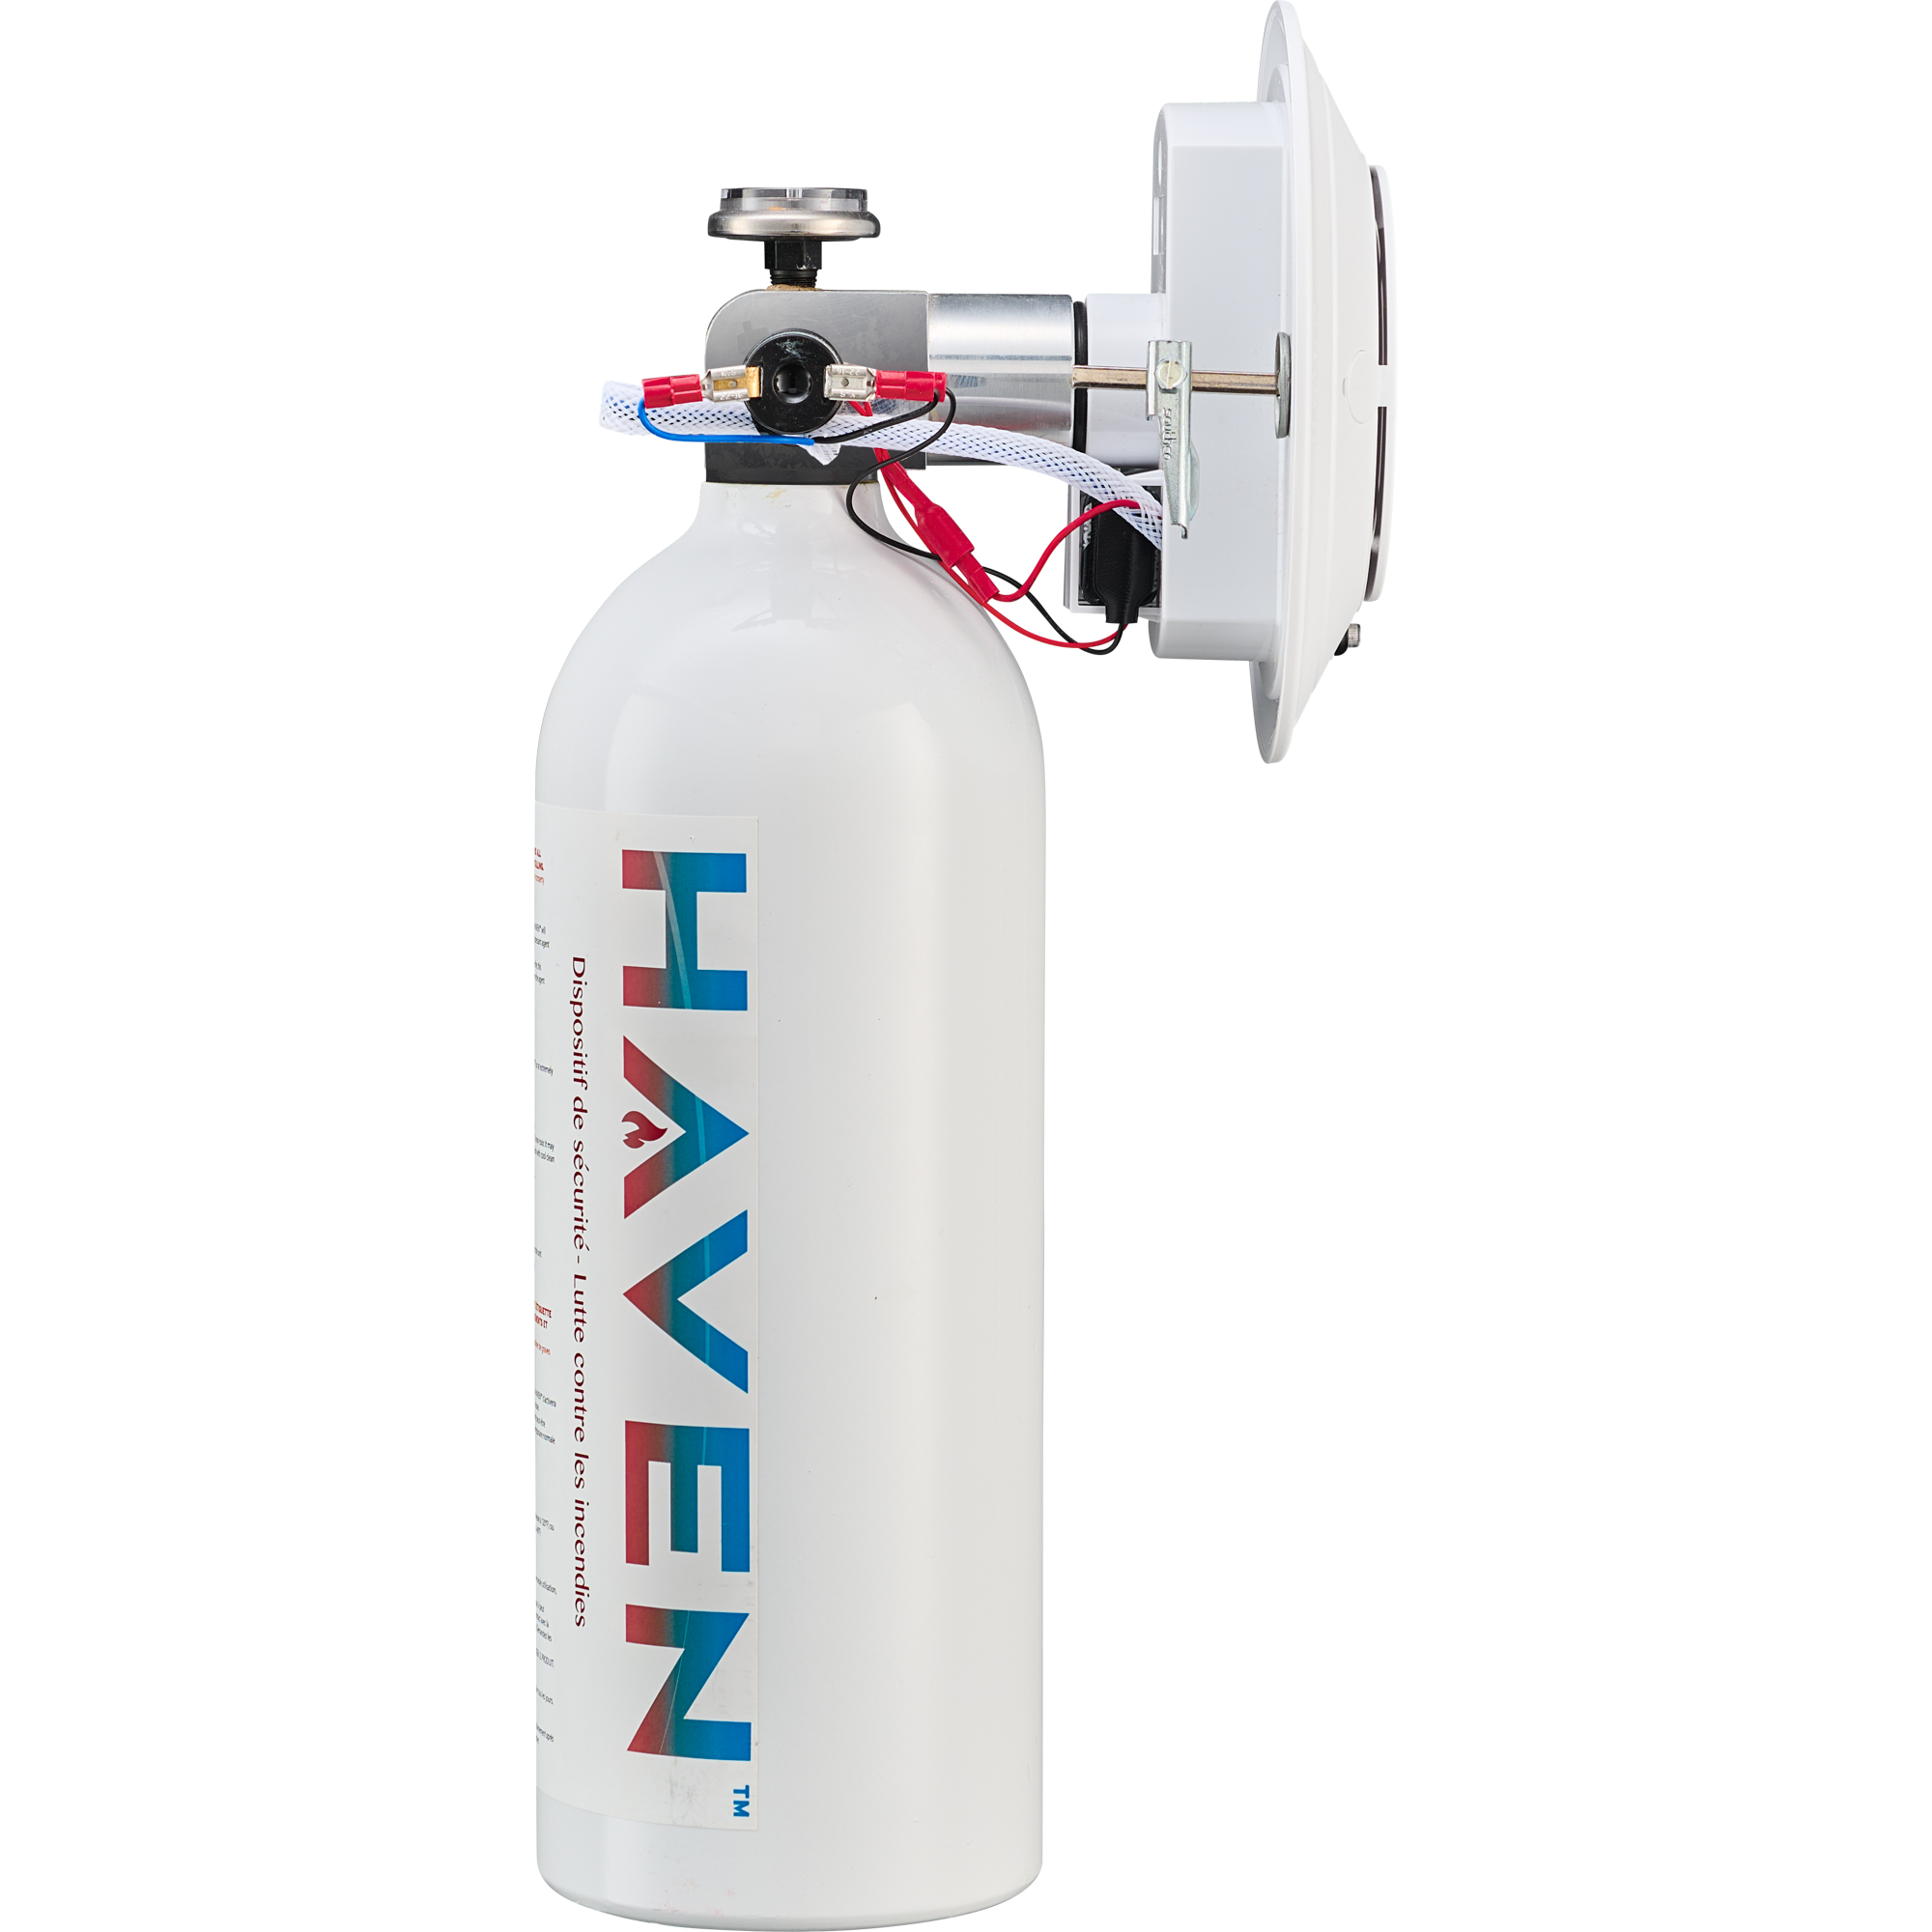 HAVEN Fire Suppression Safety Device 200F - 93C Rated